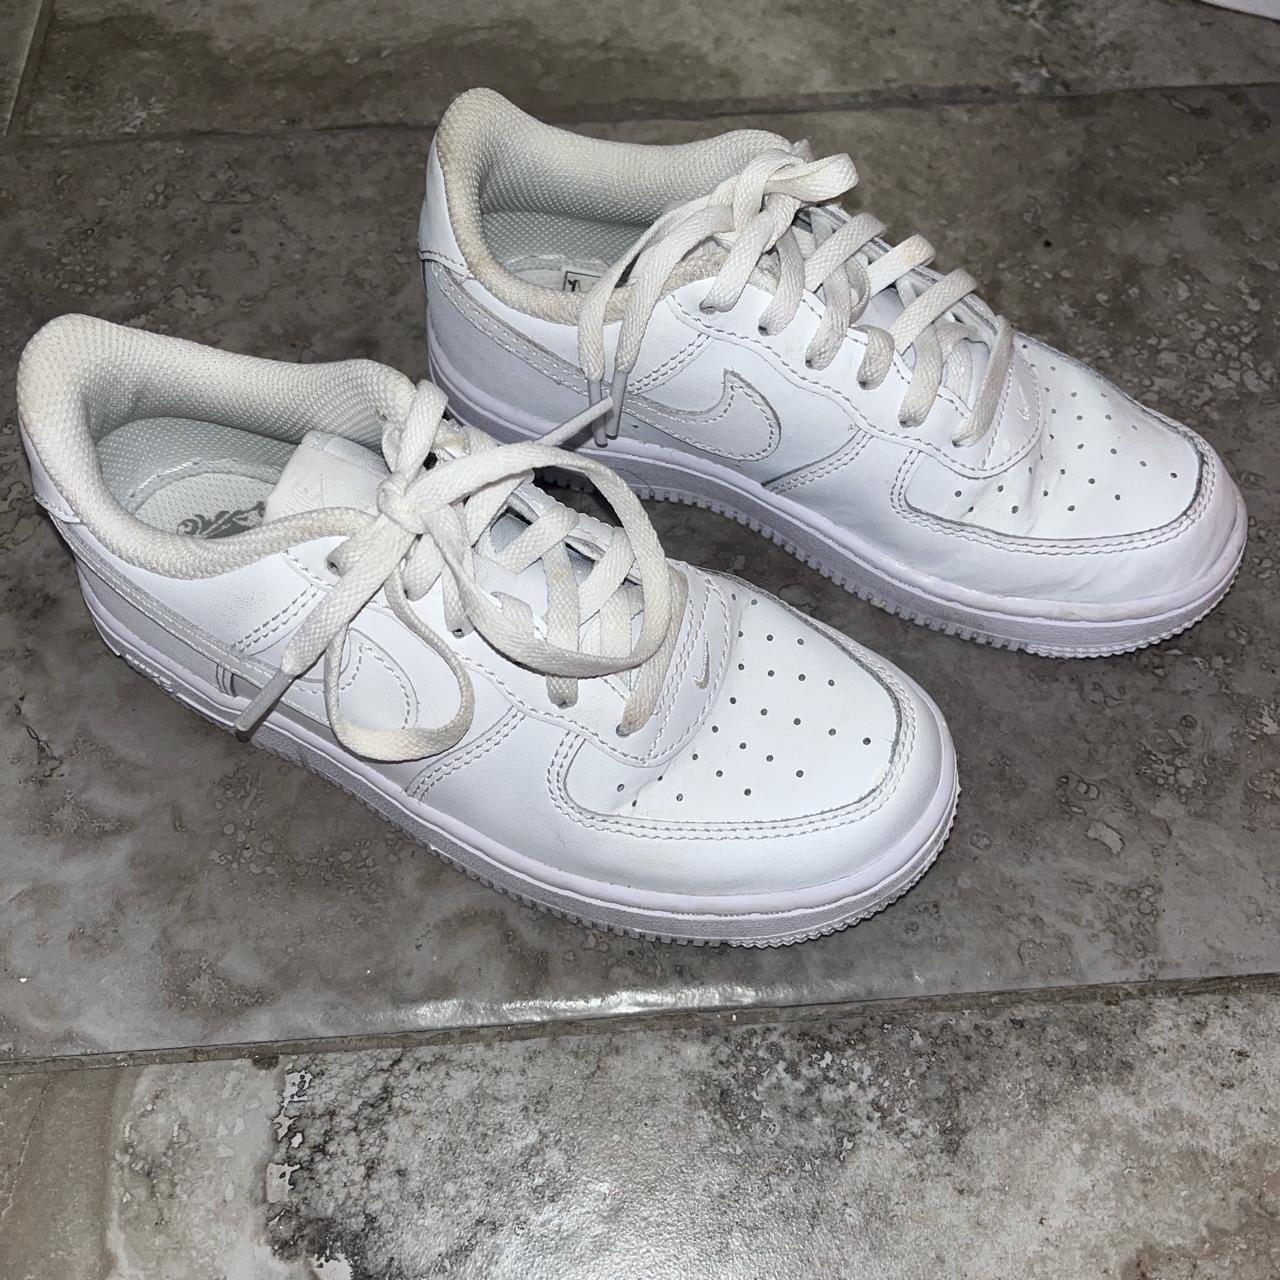 White Nike childrens trainers Size UK 13 Been... - Depop